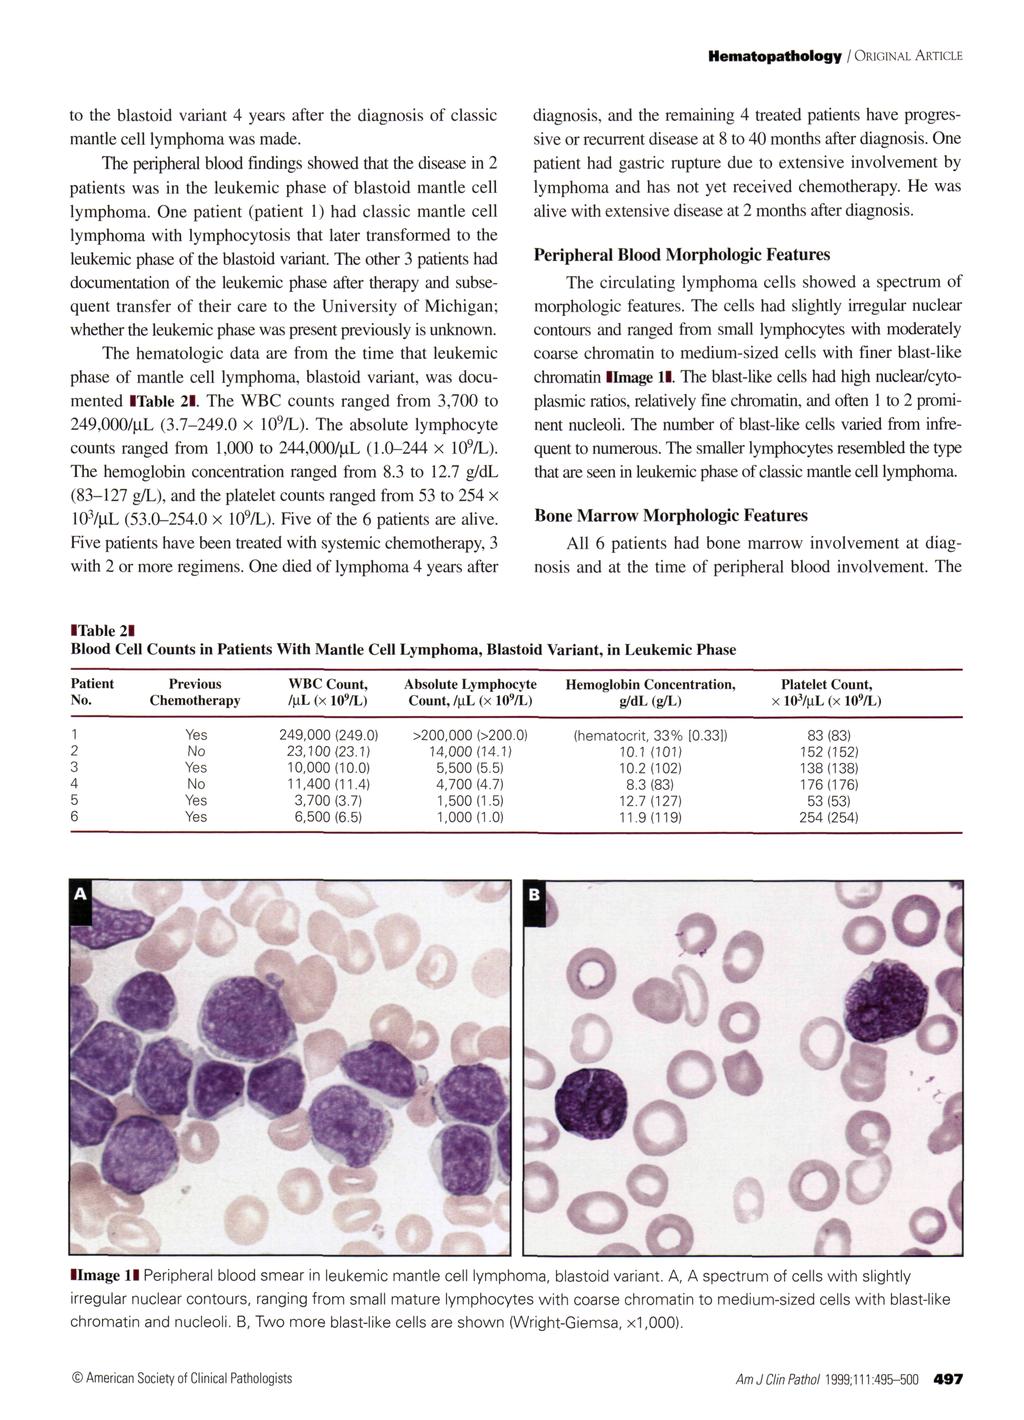 Hematopathology / ORIGINAL ARTICLE diagnosis, and the remaining 4 treated patients have progressive or recurrent disease at 8 to 40 months after diagnosis.